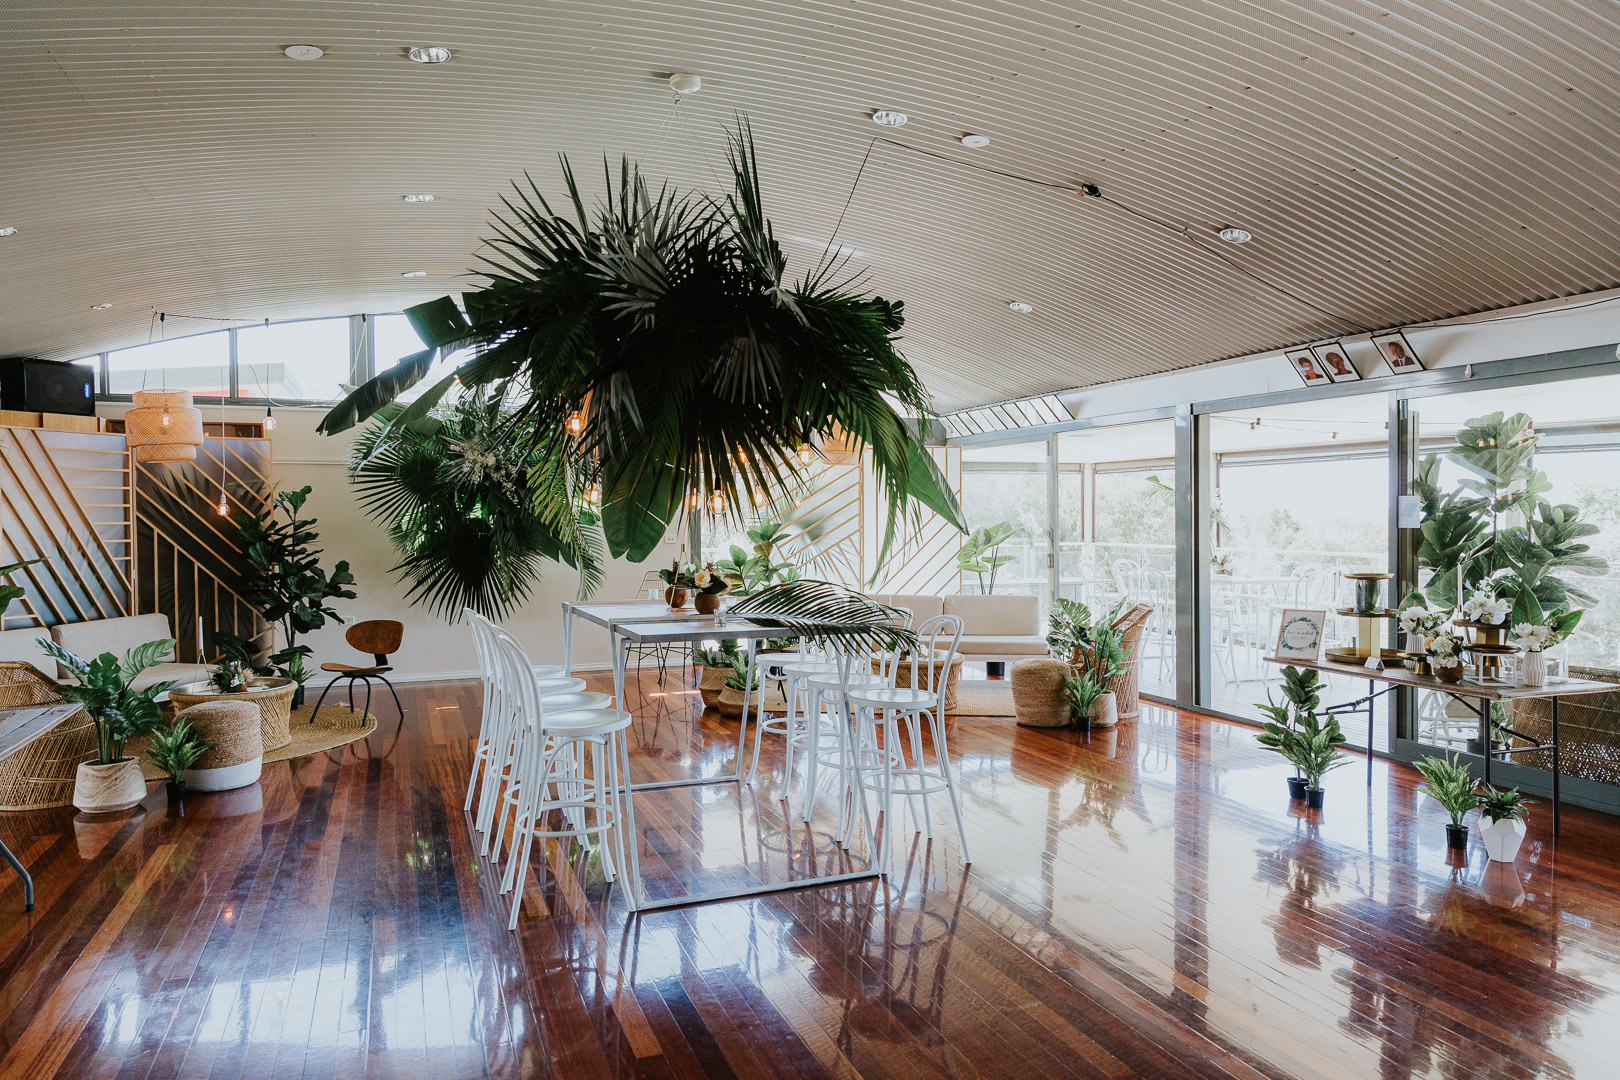 Pacific Palms Surf Club is decorated with a tropical stylning with large monstera leaves